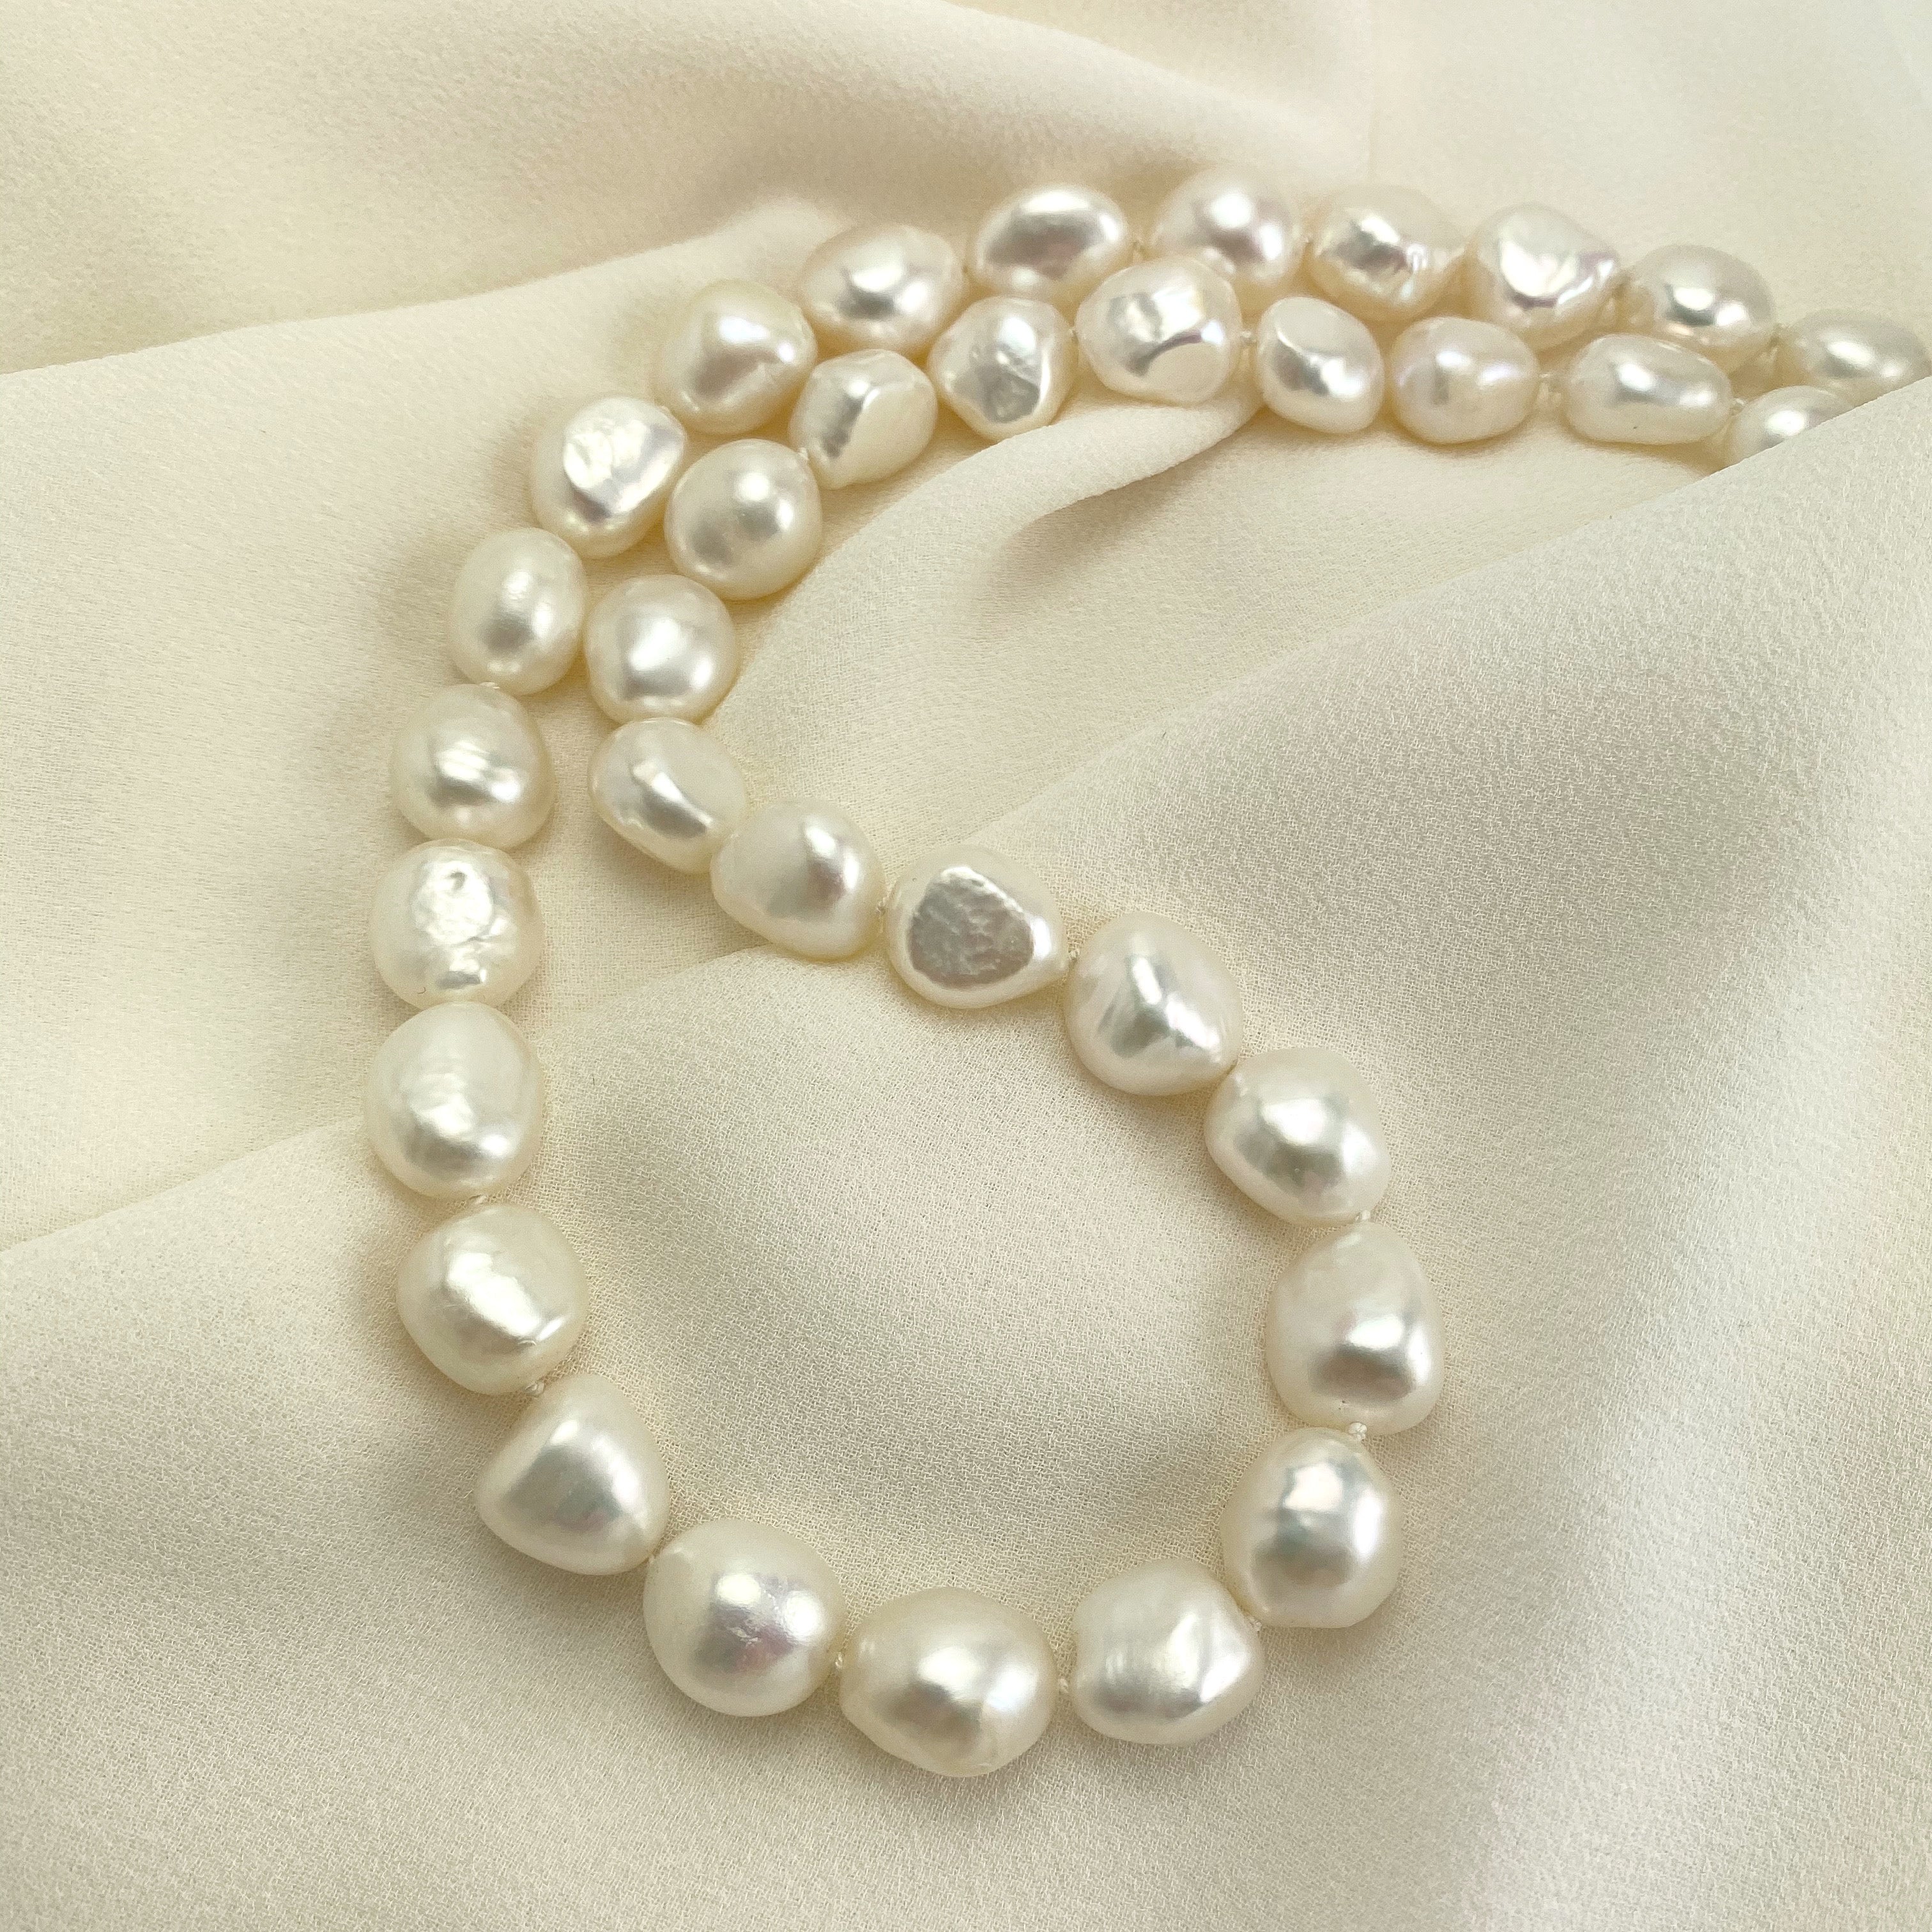 Waltz Baroque Freshwater Pearl Necklace